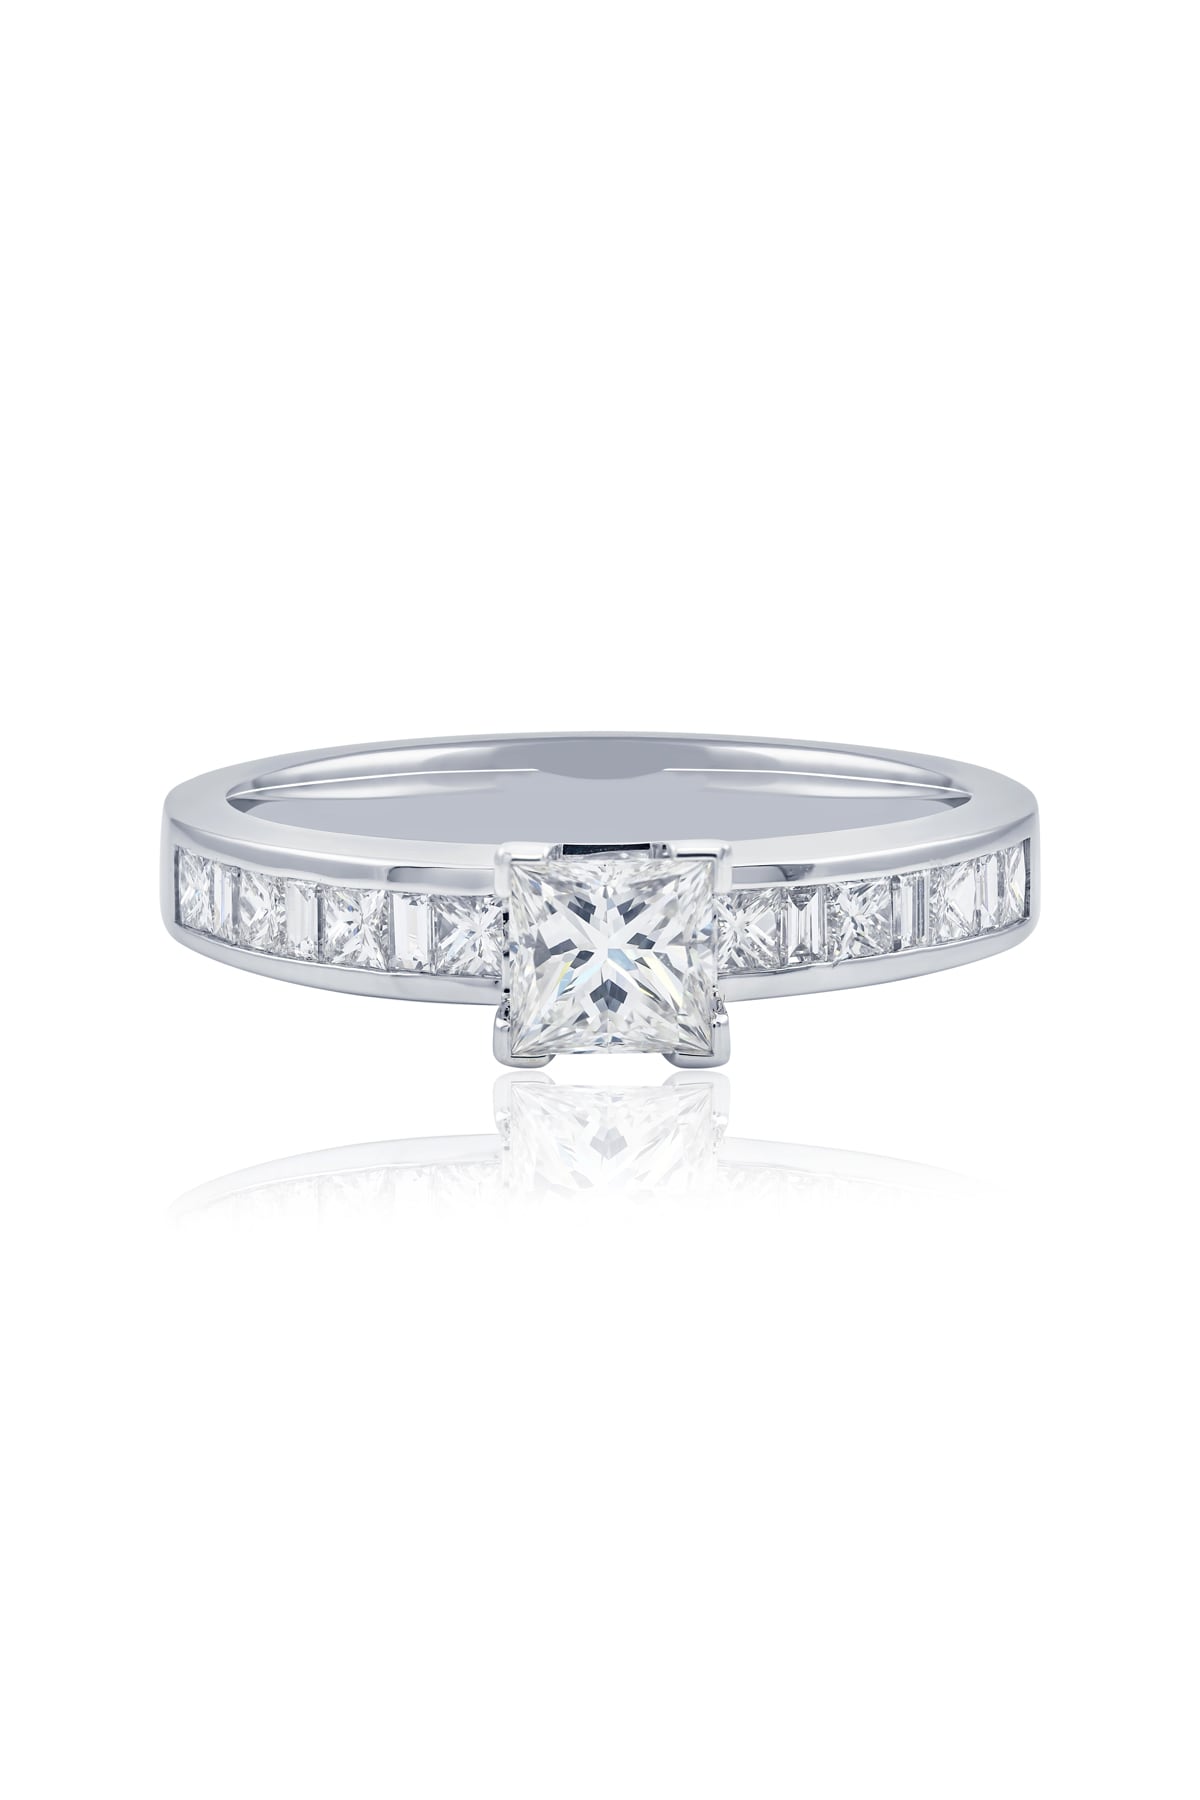 50 Point Princess Cut Engagement Ring in White Gold from LeGassick.